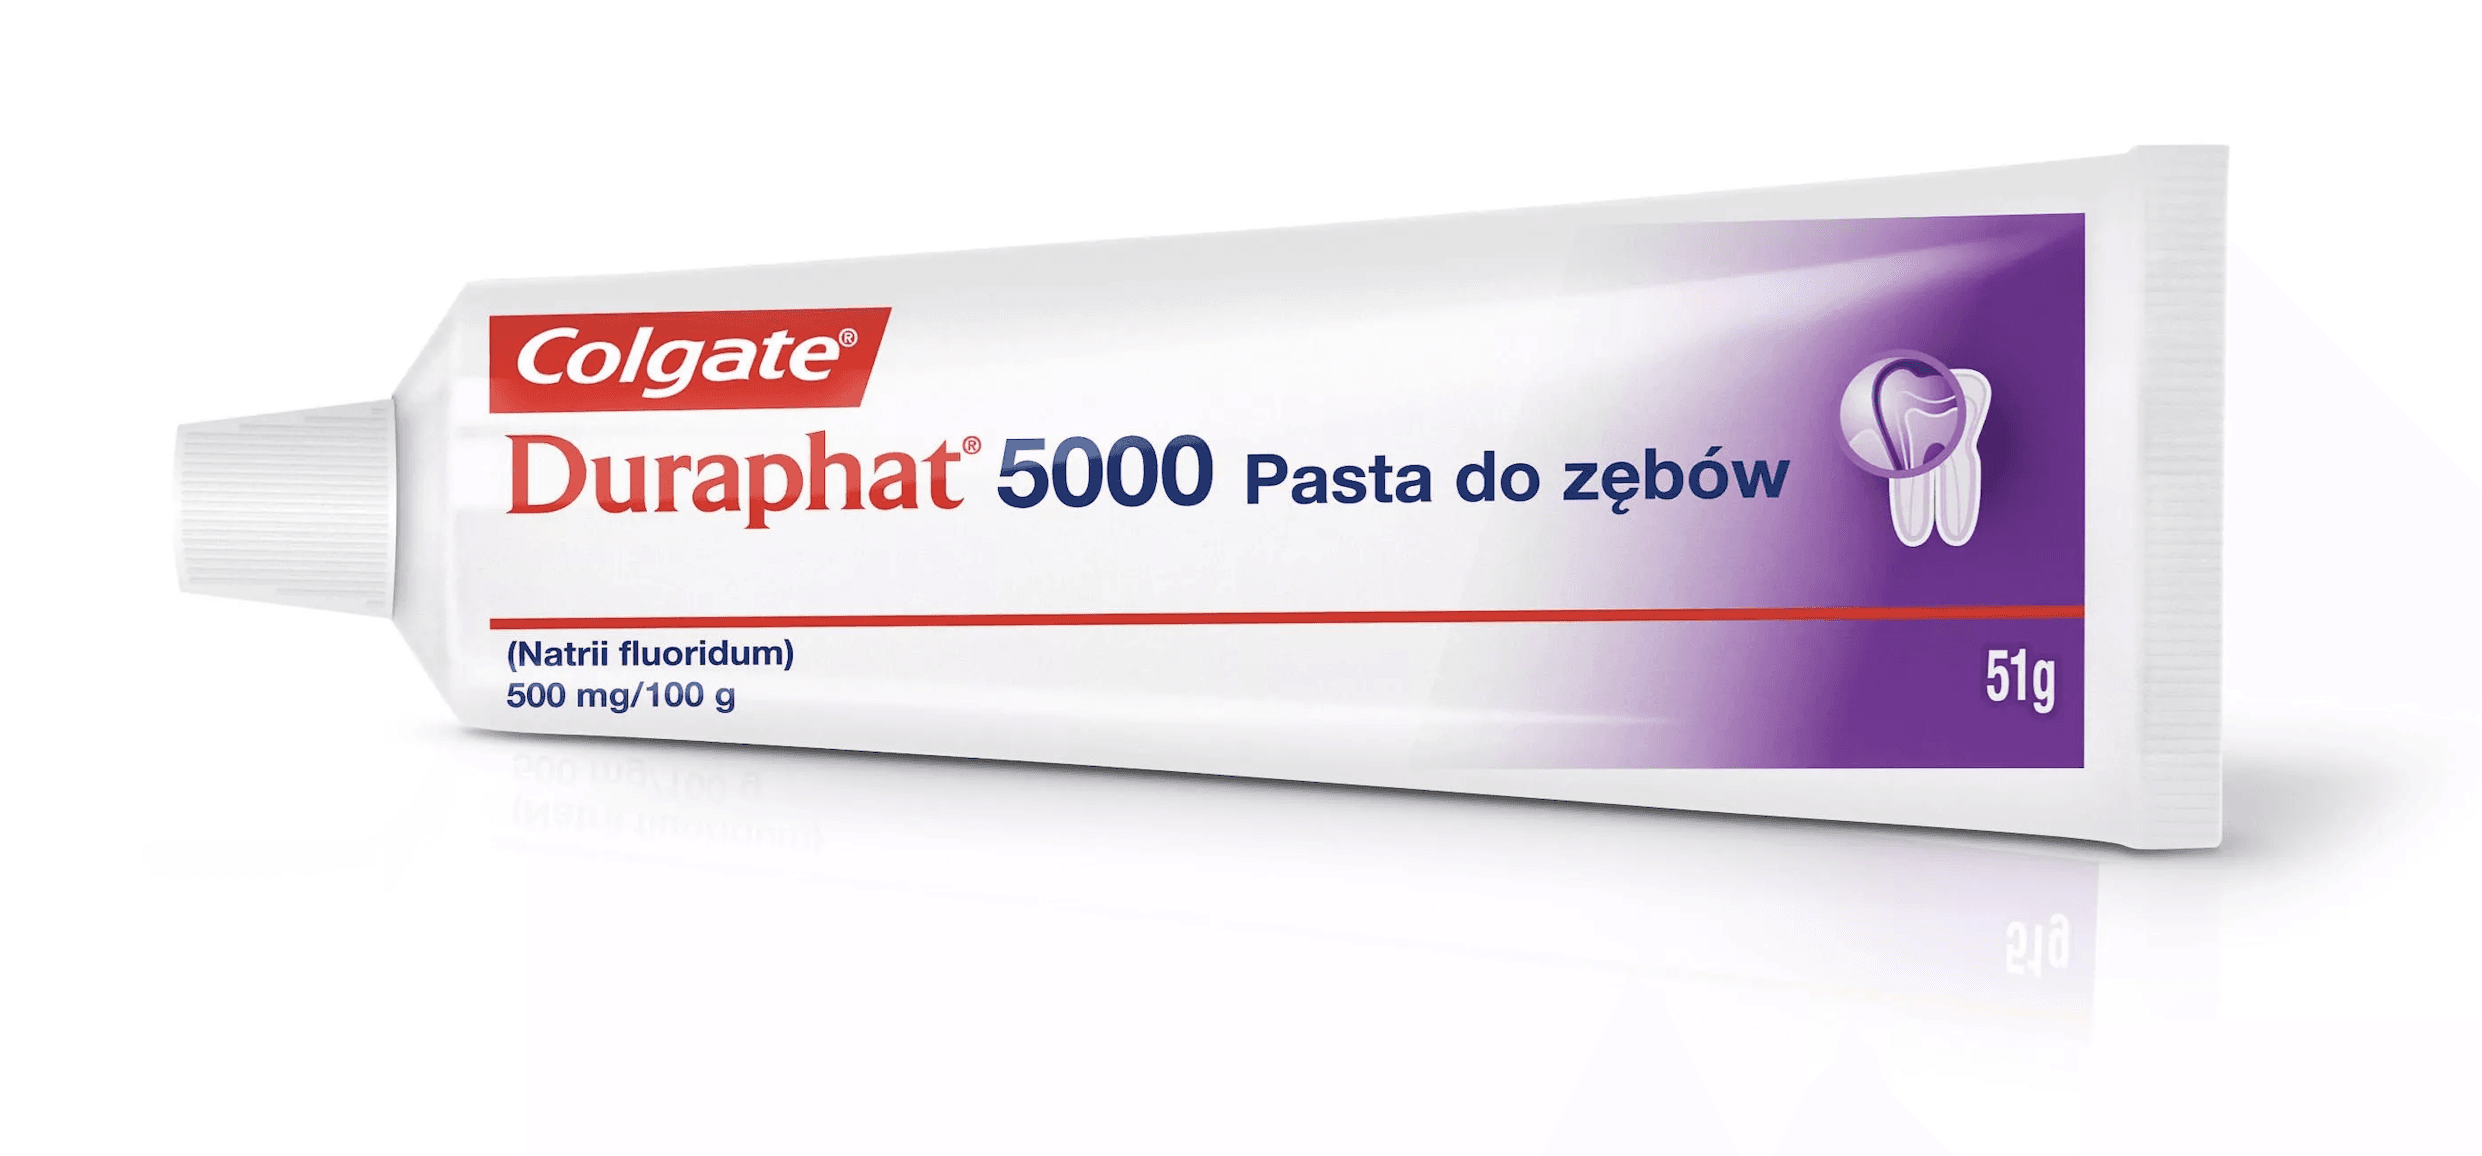 Colgate Duraphat 5000 medicated toothpaste